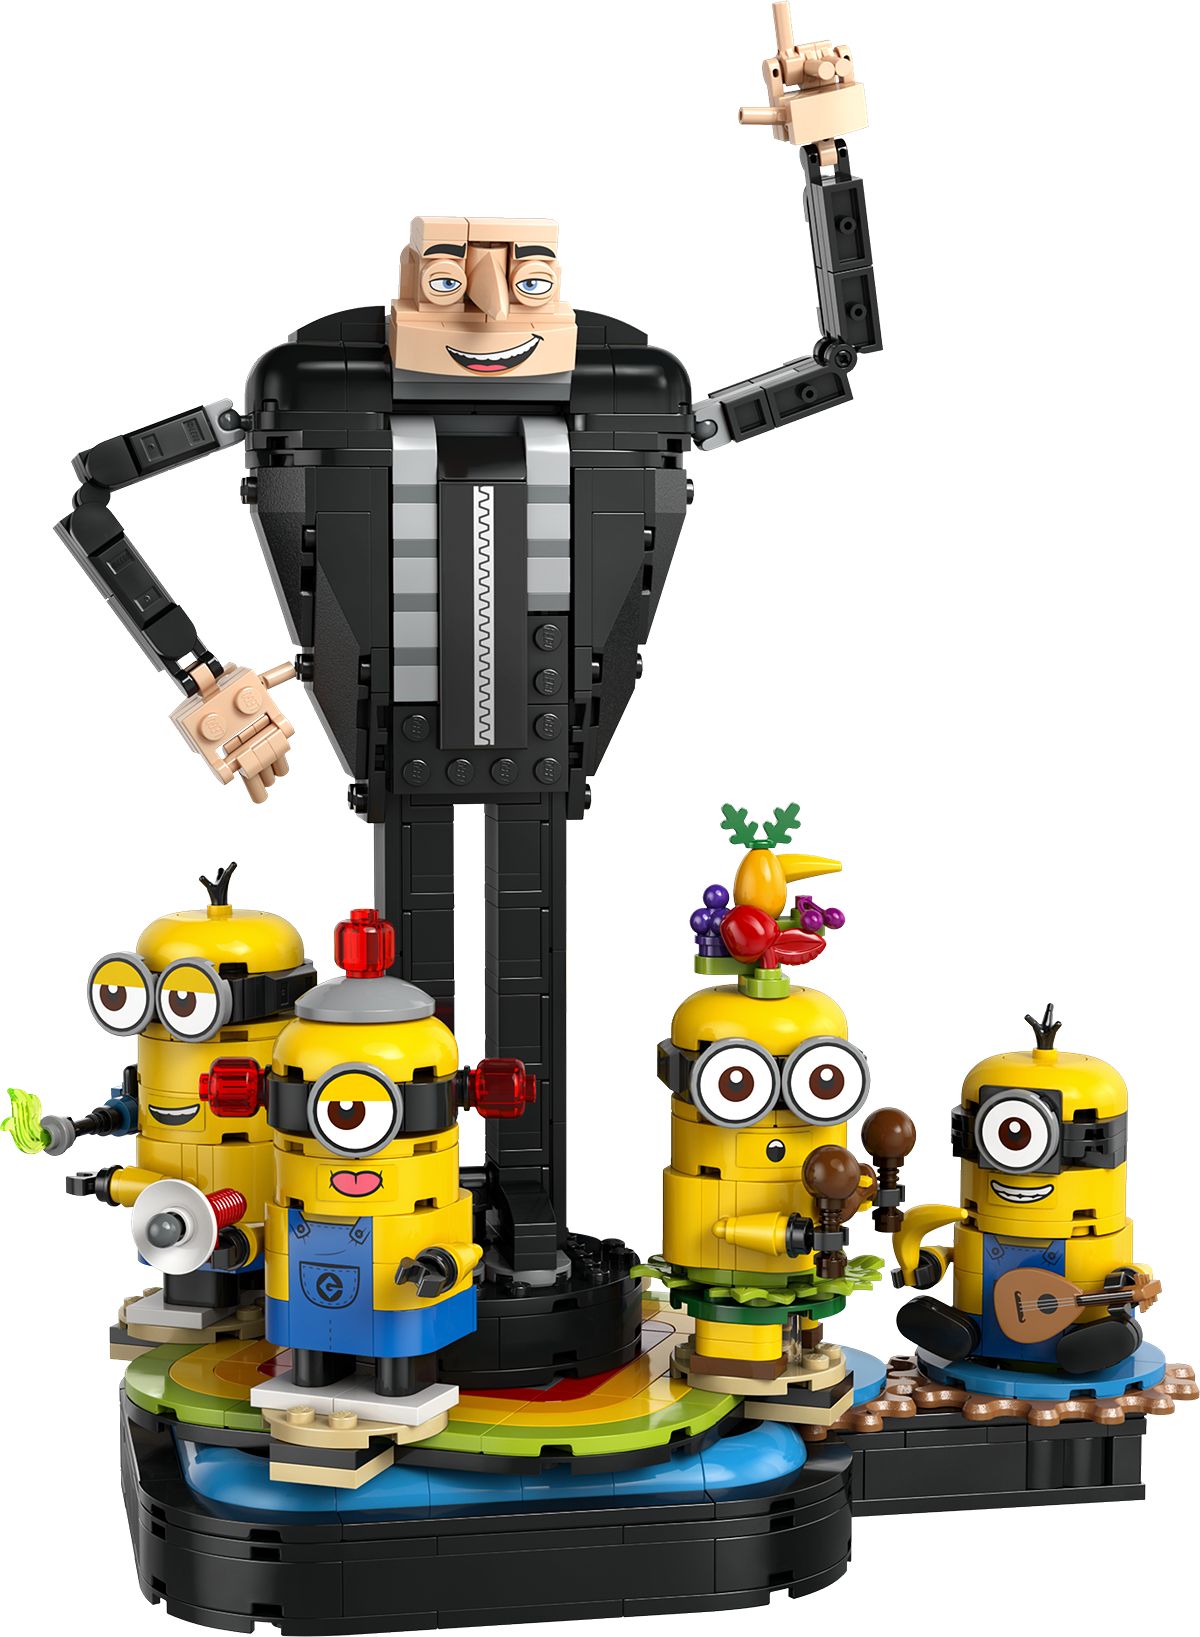 LEGO Despicable Me 4 Sets: Release Date, Details, and More - -1514806464